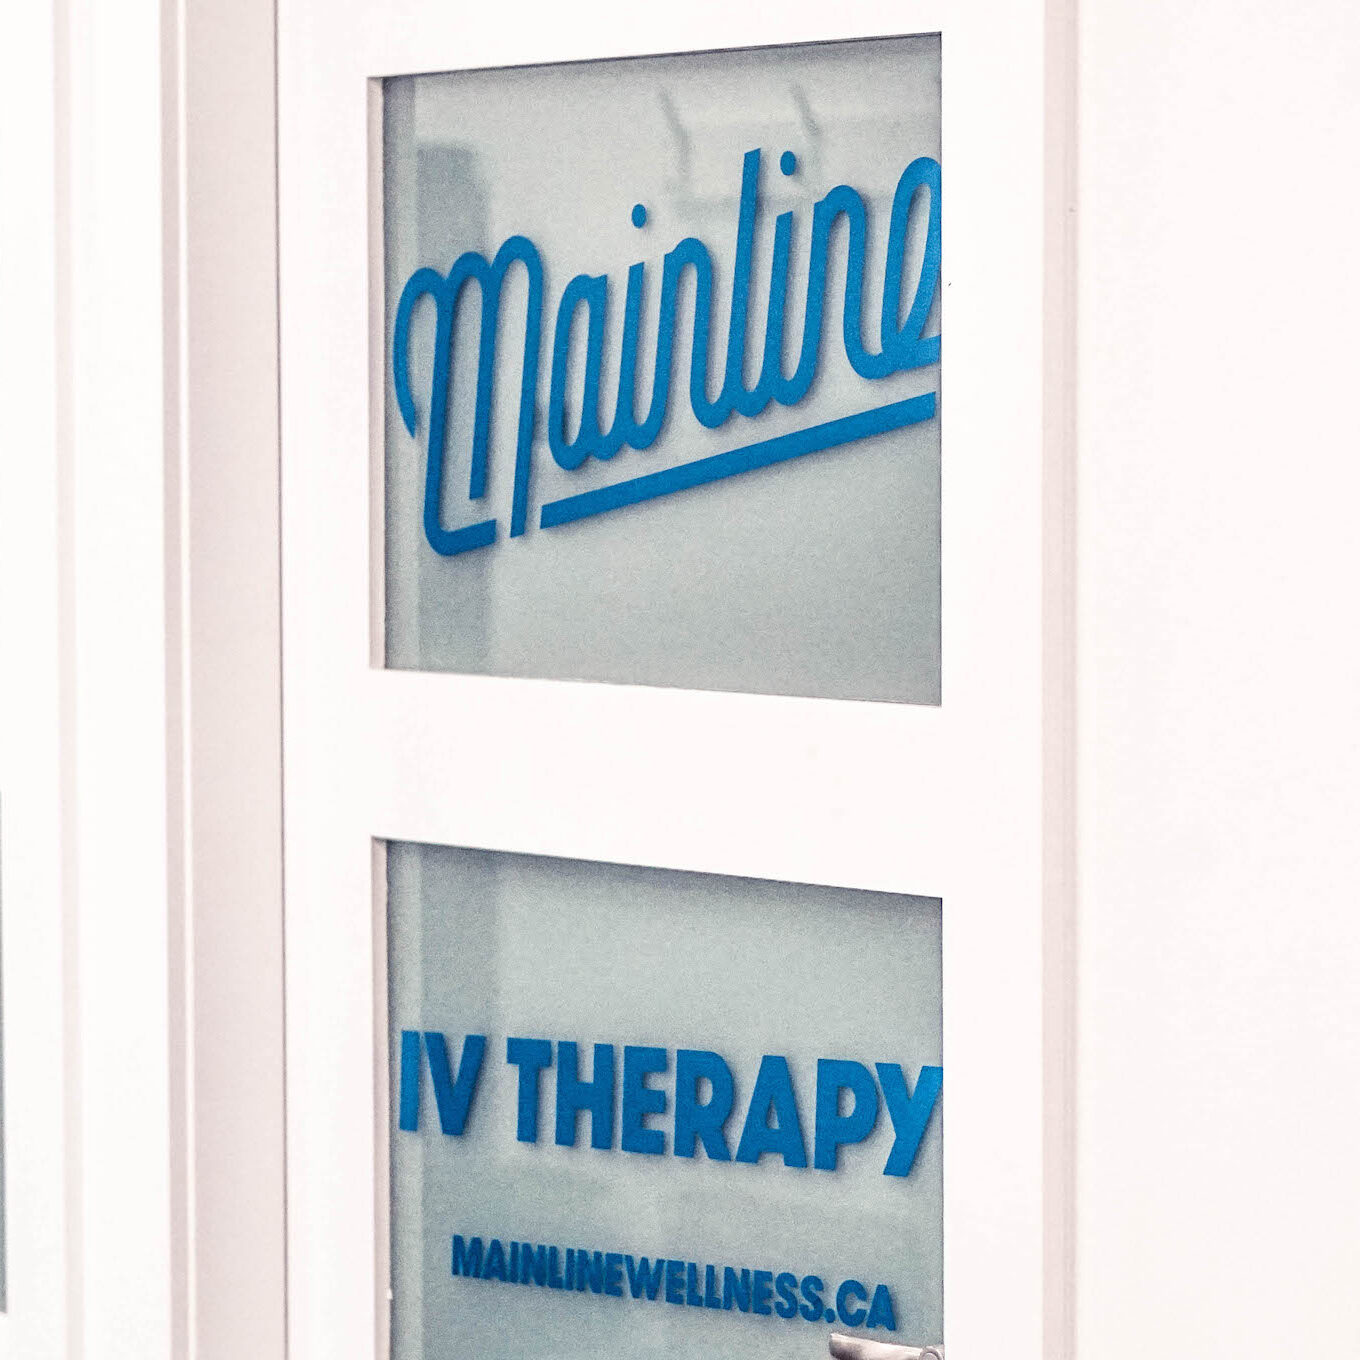 IV Therapy by Mainline Wellness at Envision Physio Vancouver